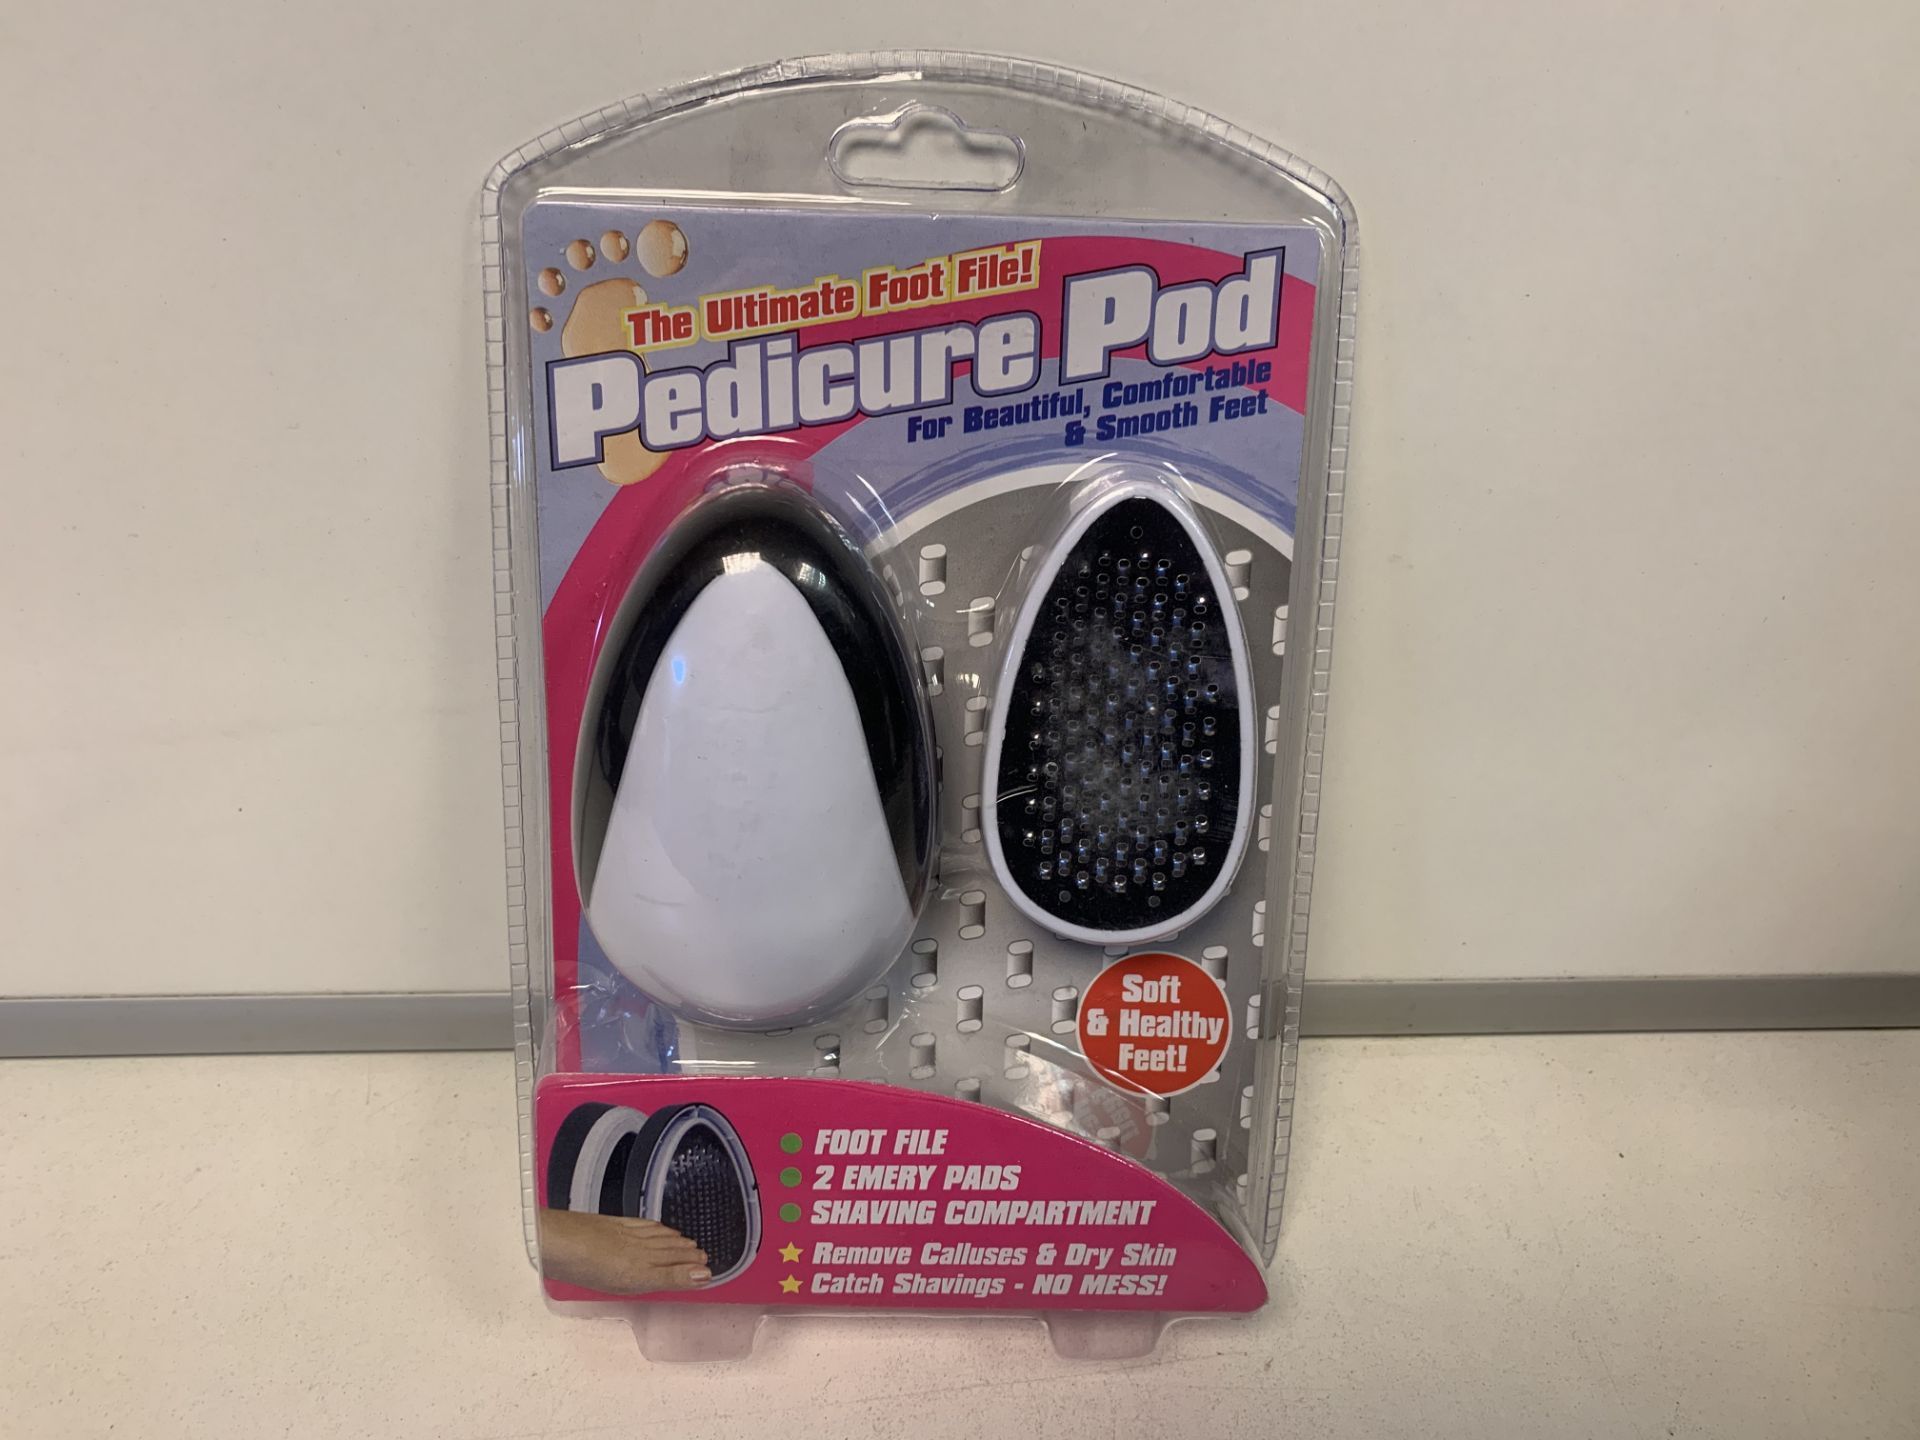 12 X NEW PACKAGED THE ULTIMATE FOOT FILE - PEDICURE PODS (18/26)